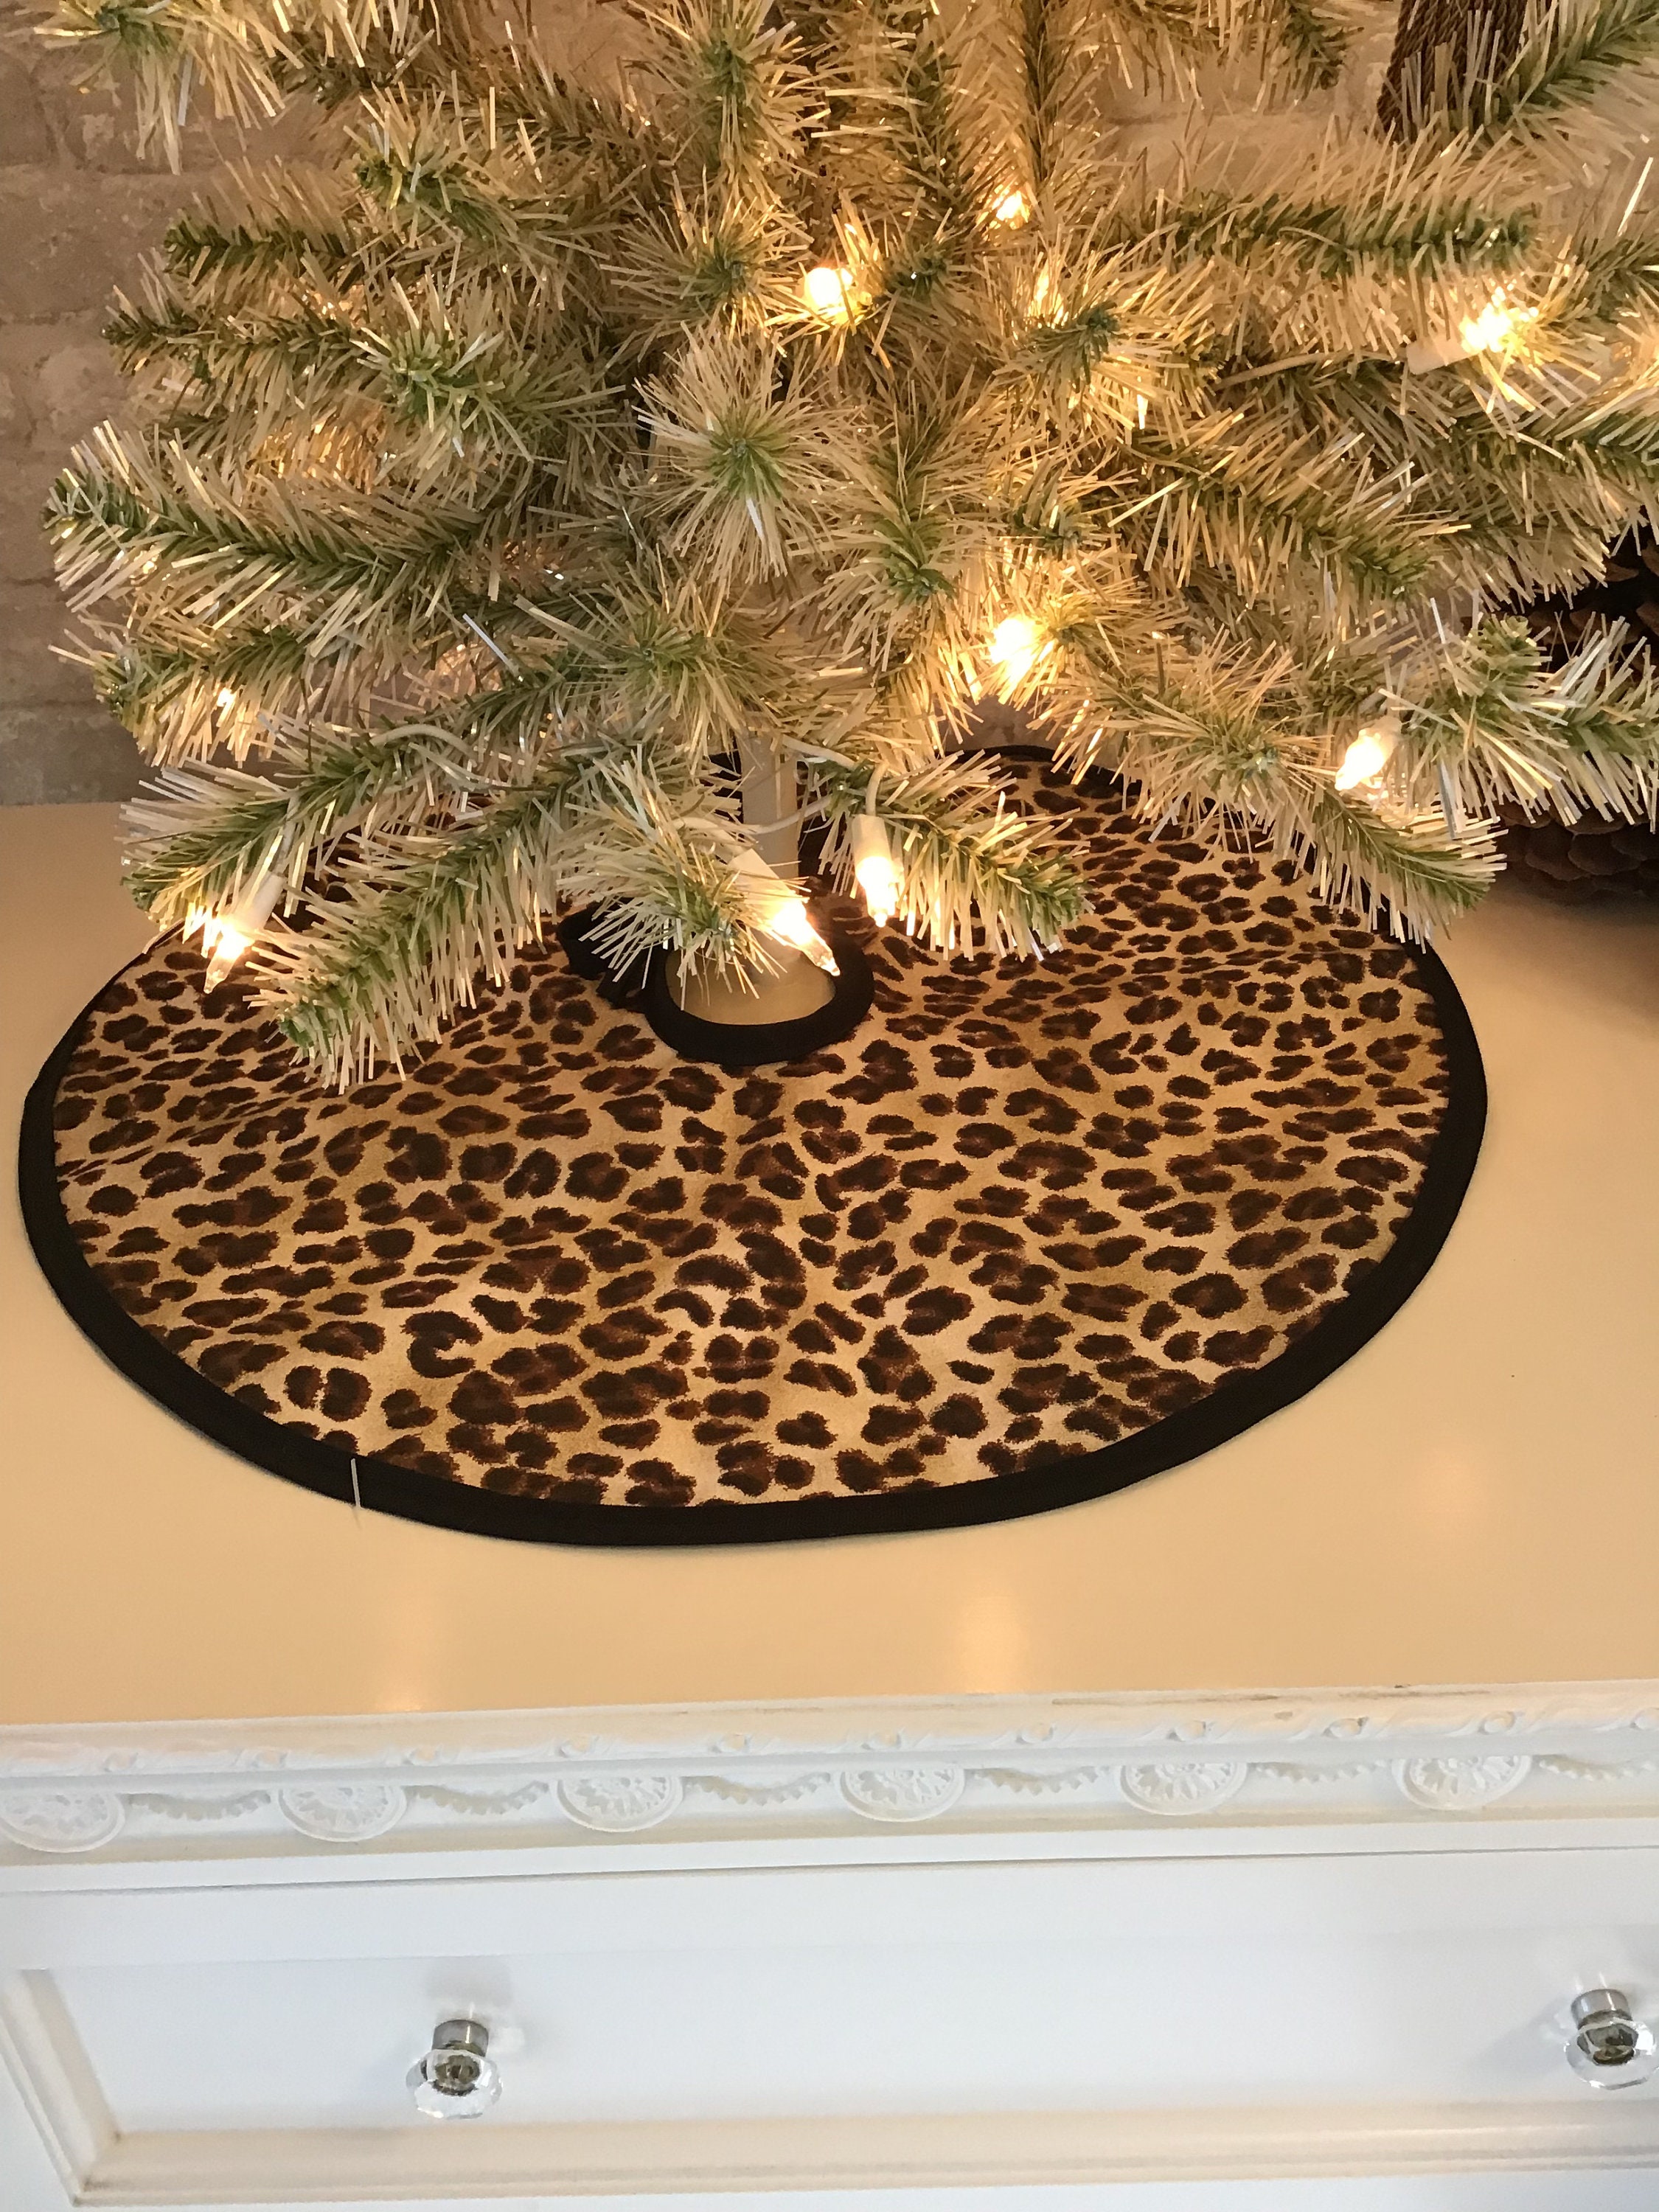 AQQA Christmas Tree Skirt Beautiful Leopard Print Rustic Christmas Tree Skirt Polyester Tree Skirting Carpet for Party Holiday Decorations Xmas Ornaments 